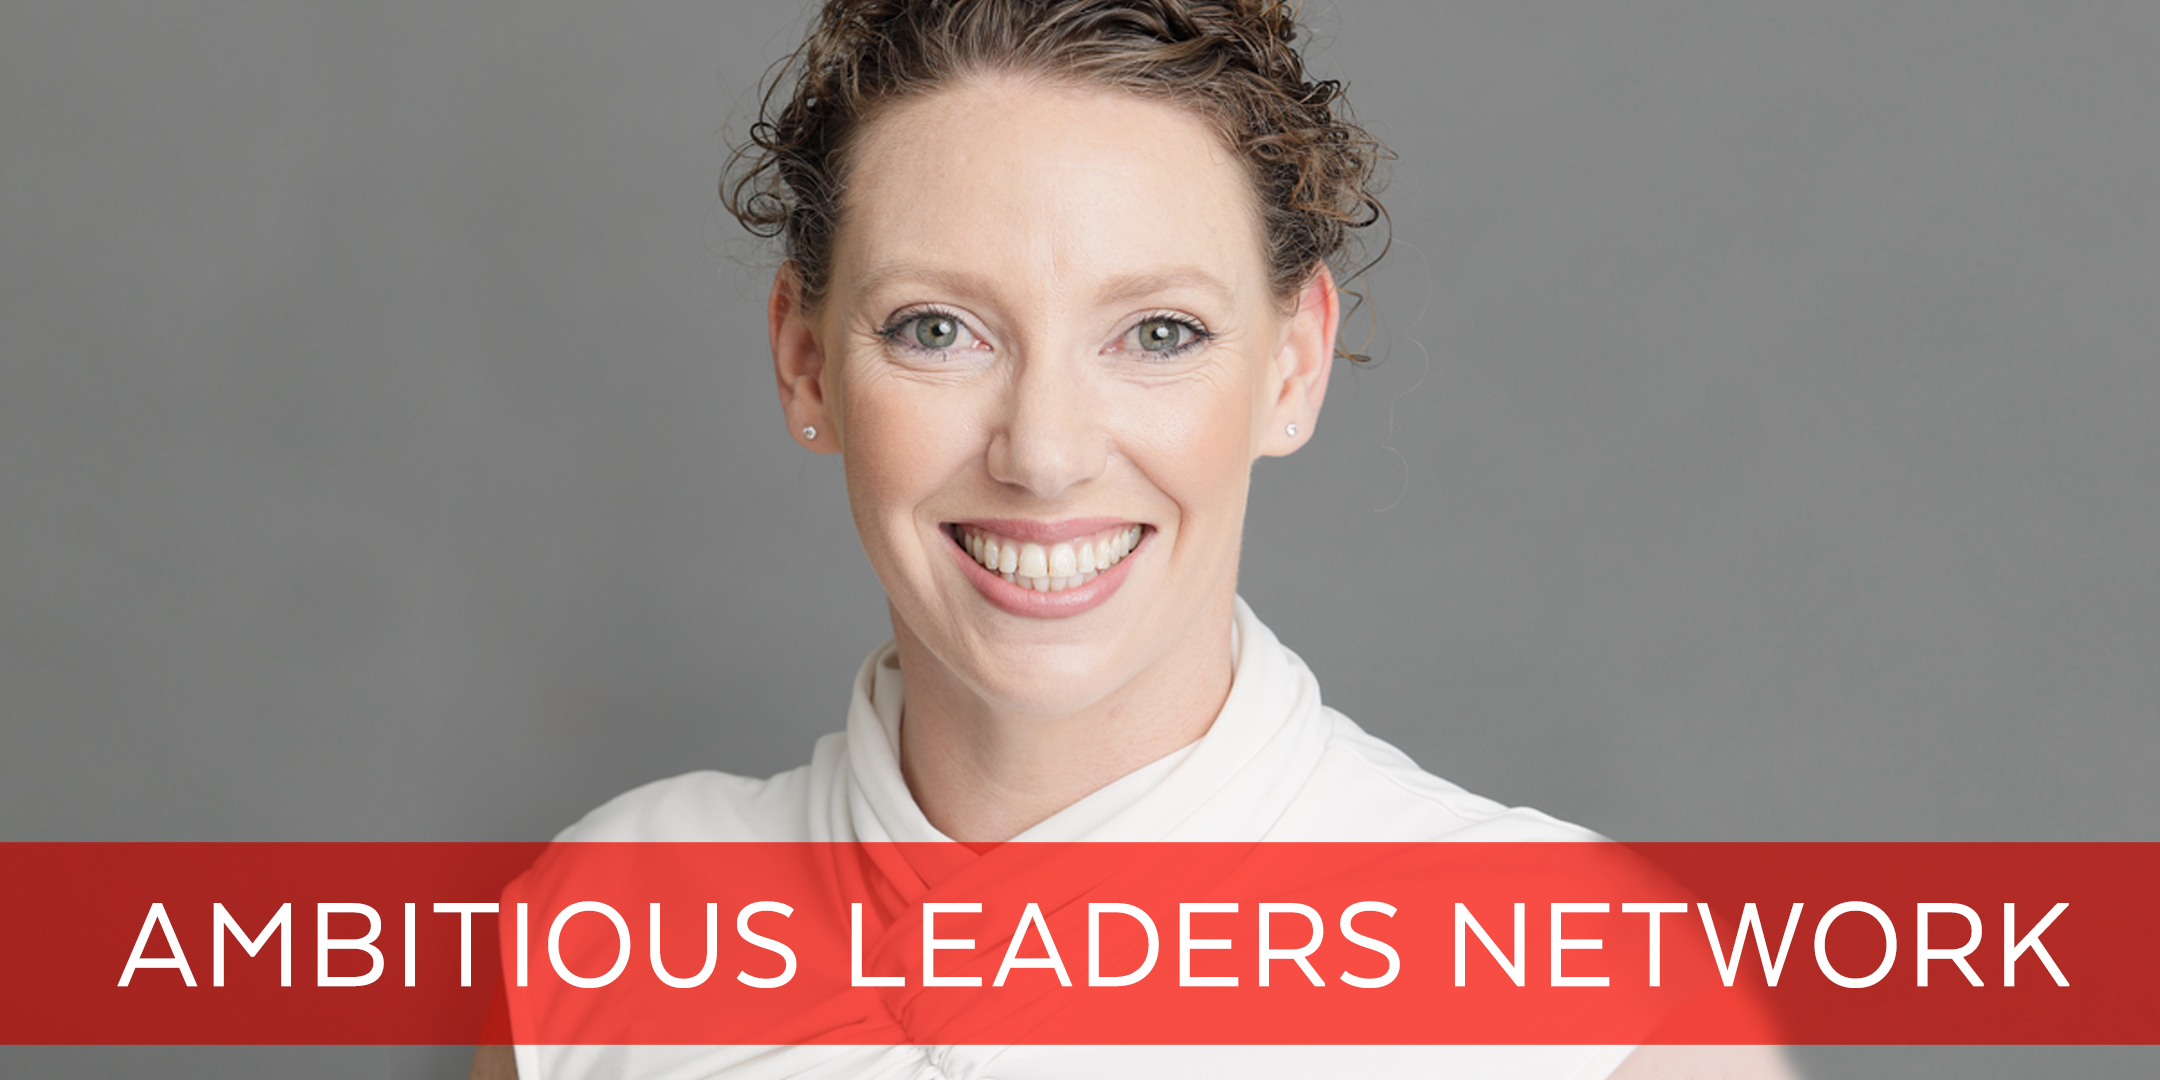 Ambitious Leaders Network - Alicia Bunting